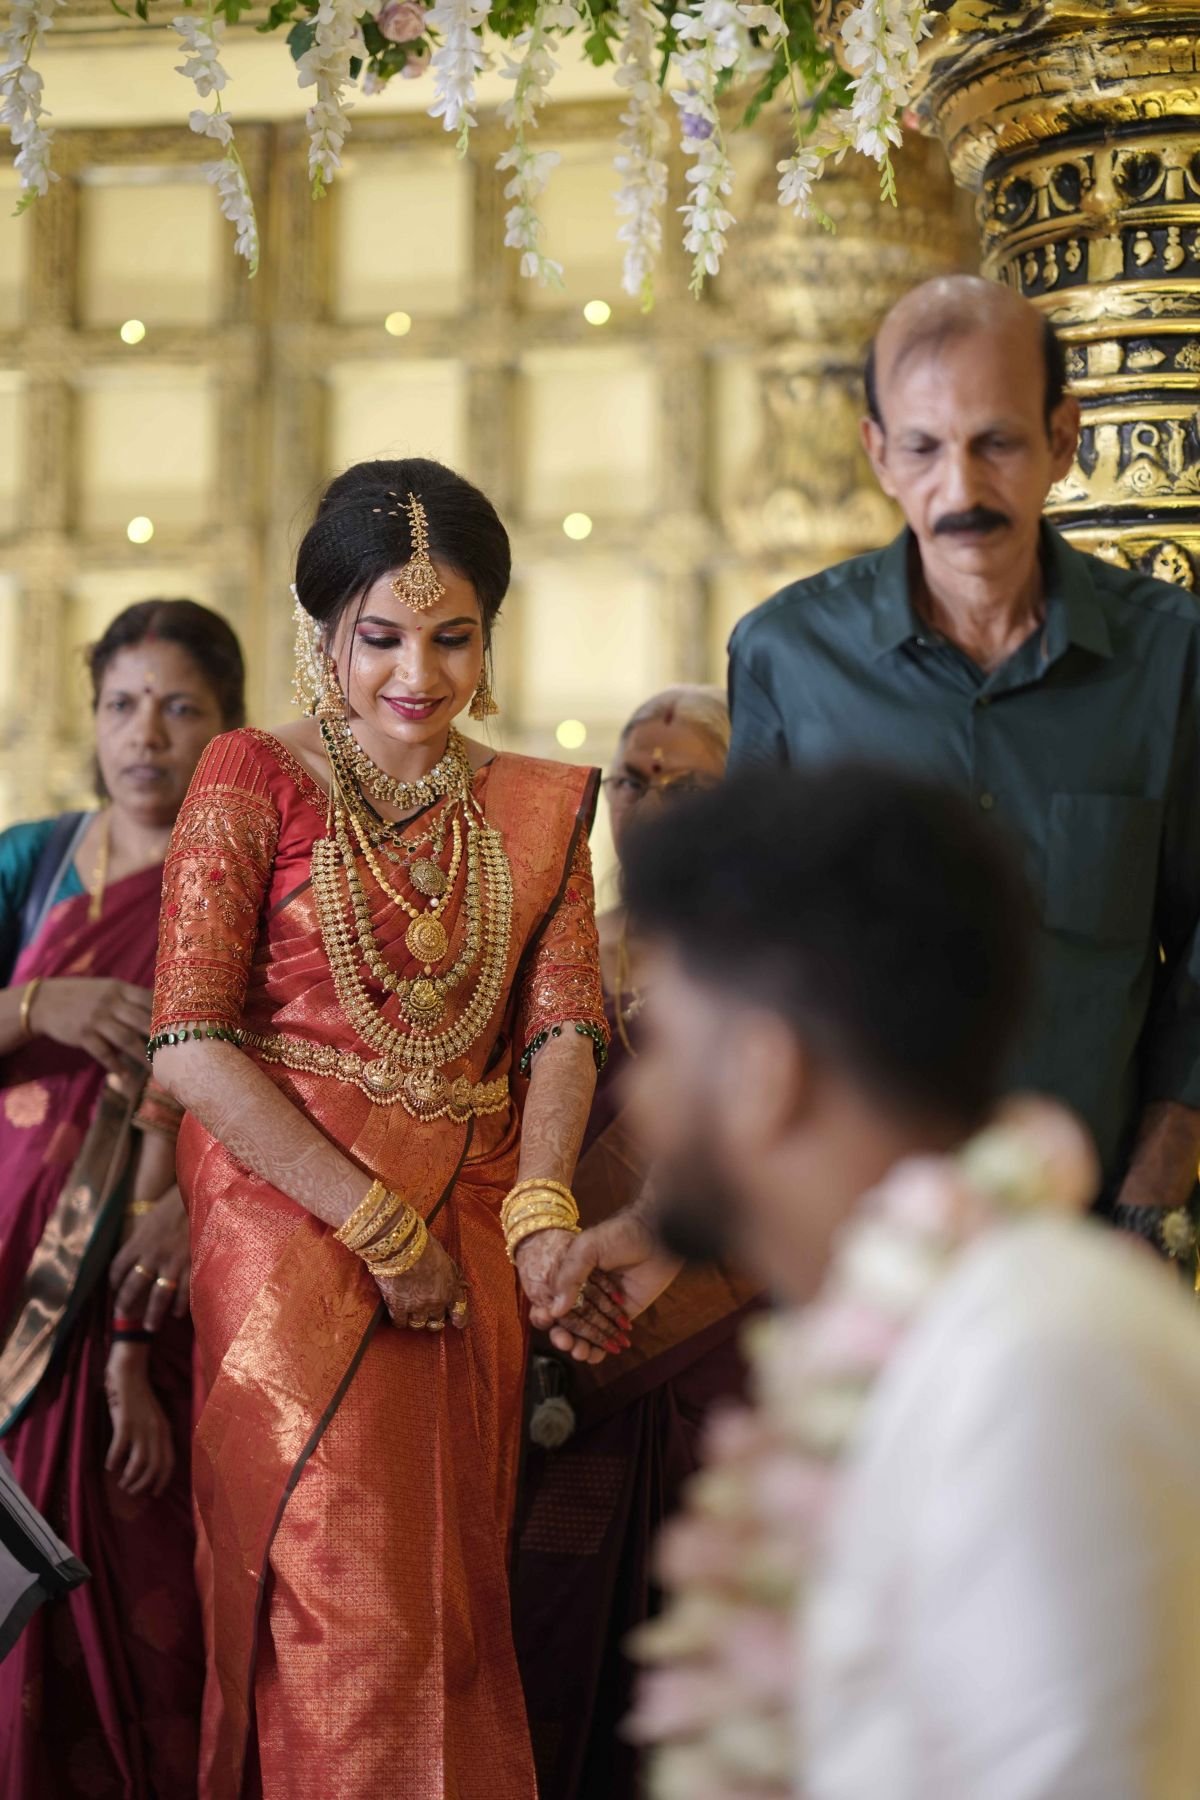 Join Us For A Joyous Union, Steeped In Hindu Wedding Traditions.